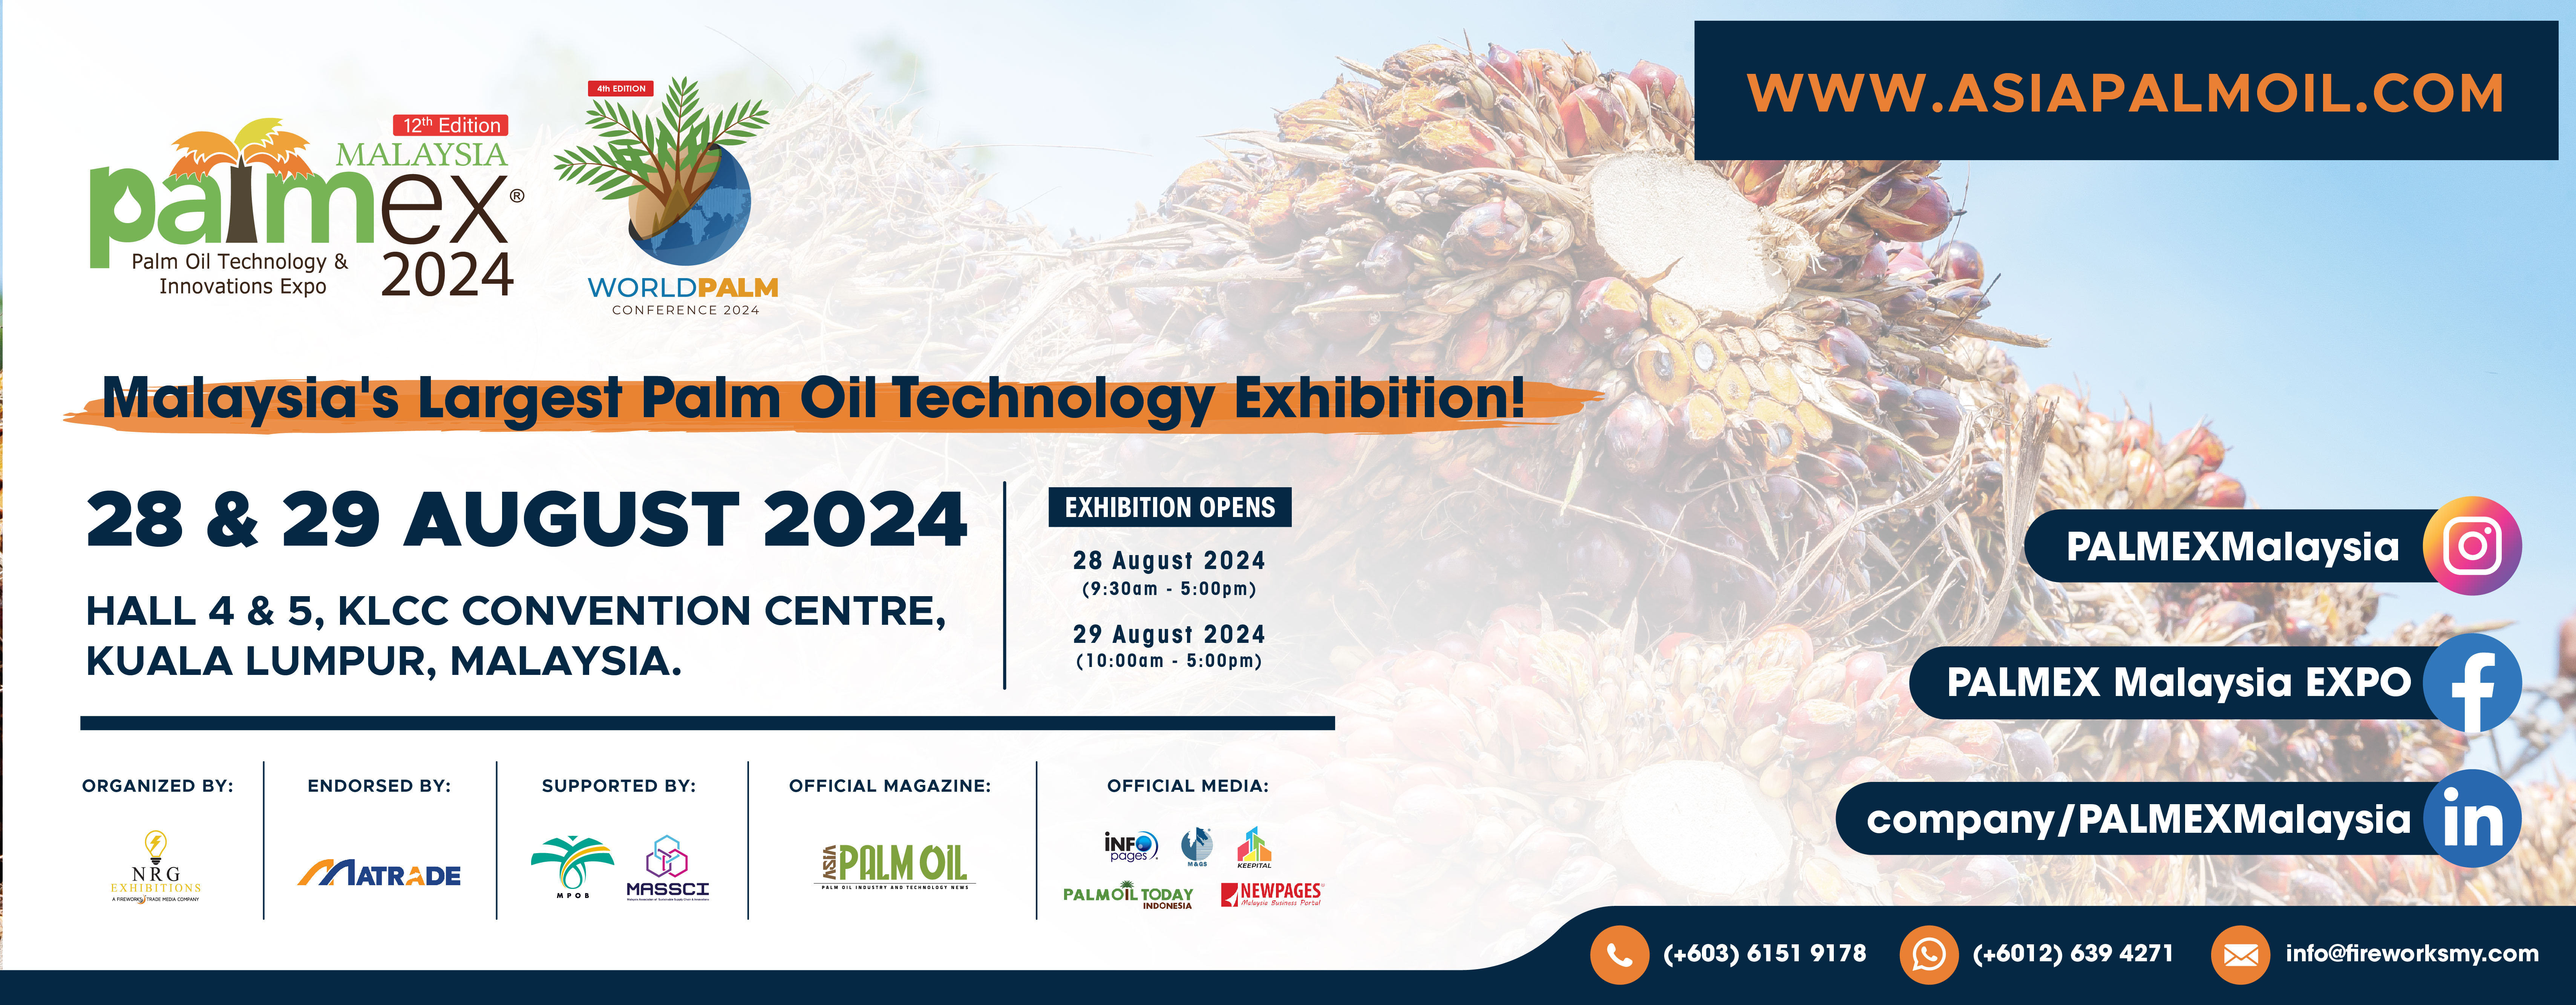 Palm Oil Technology & Innovations Expo 2024